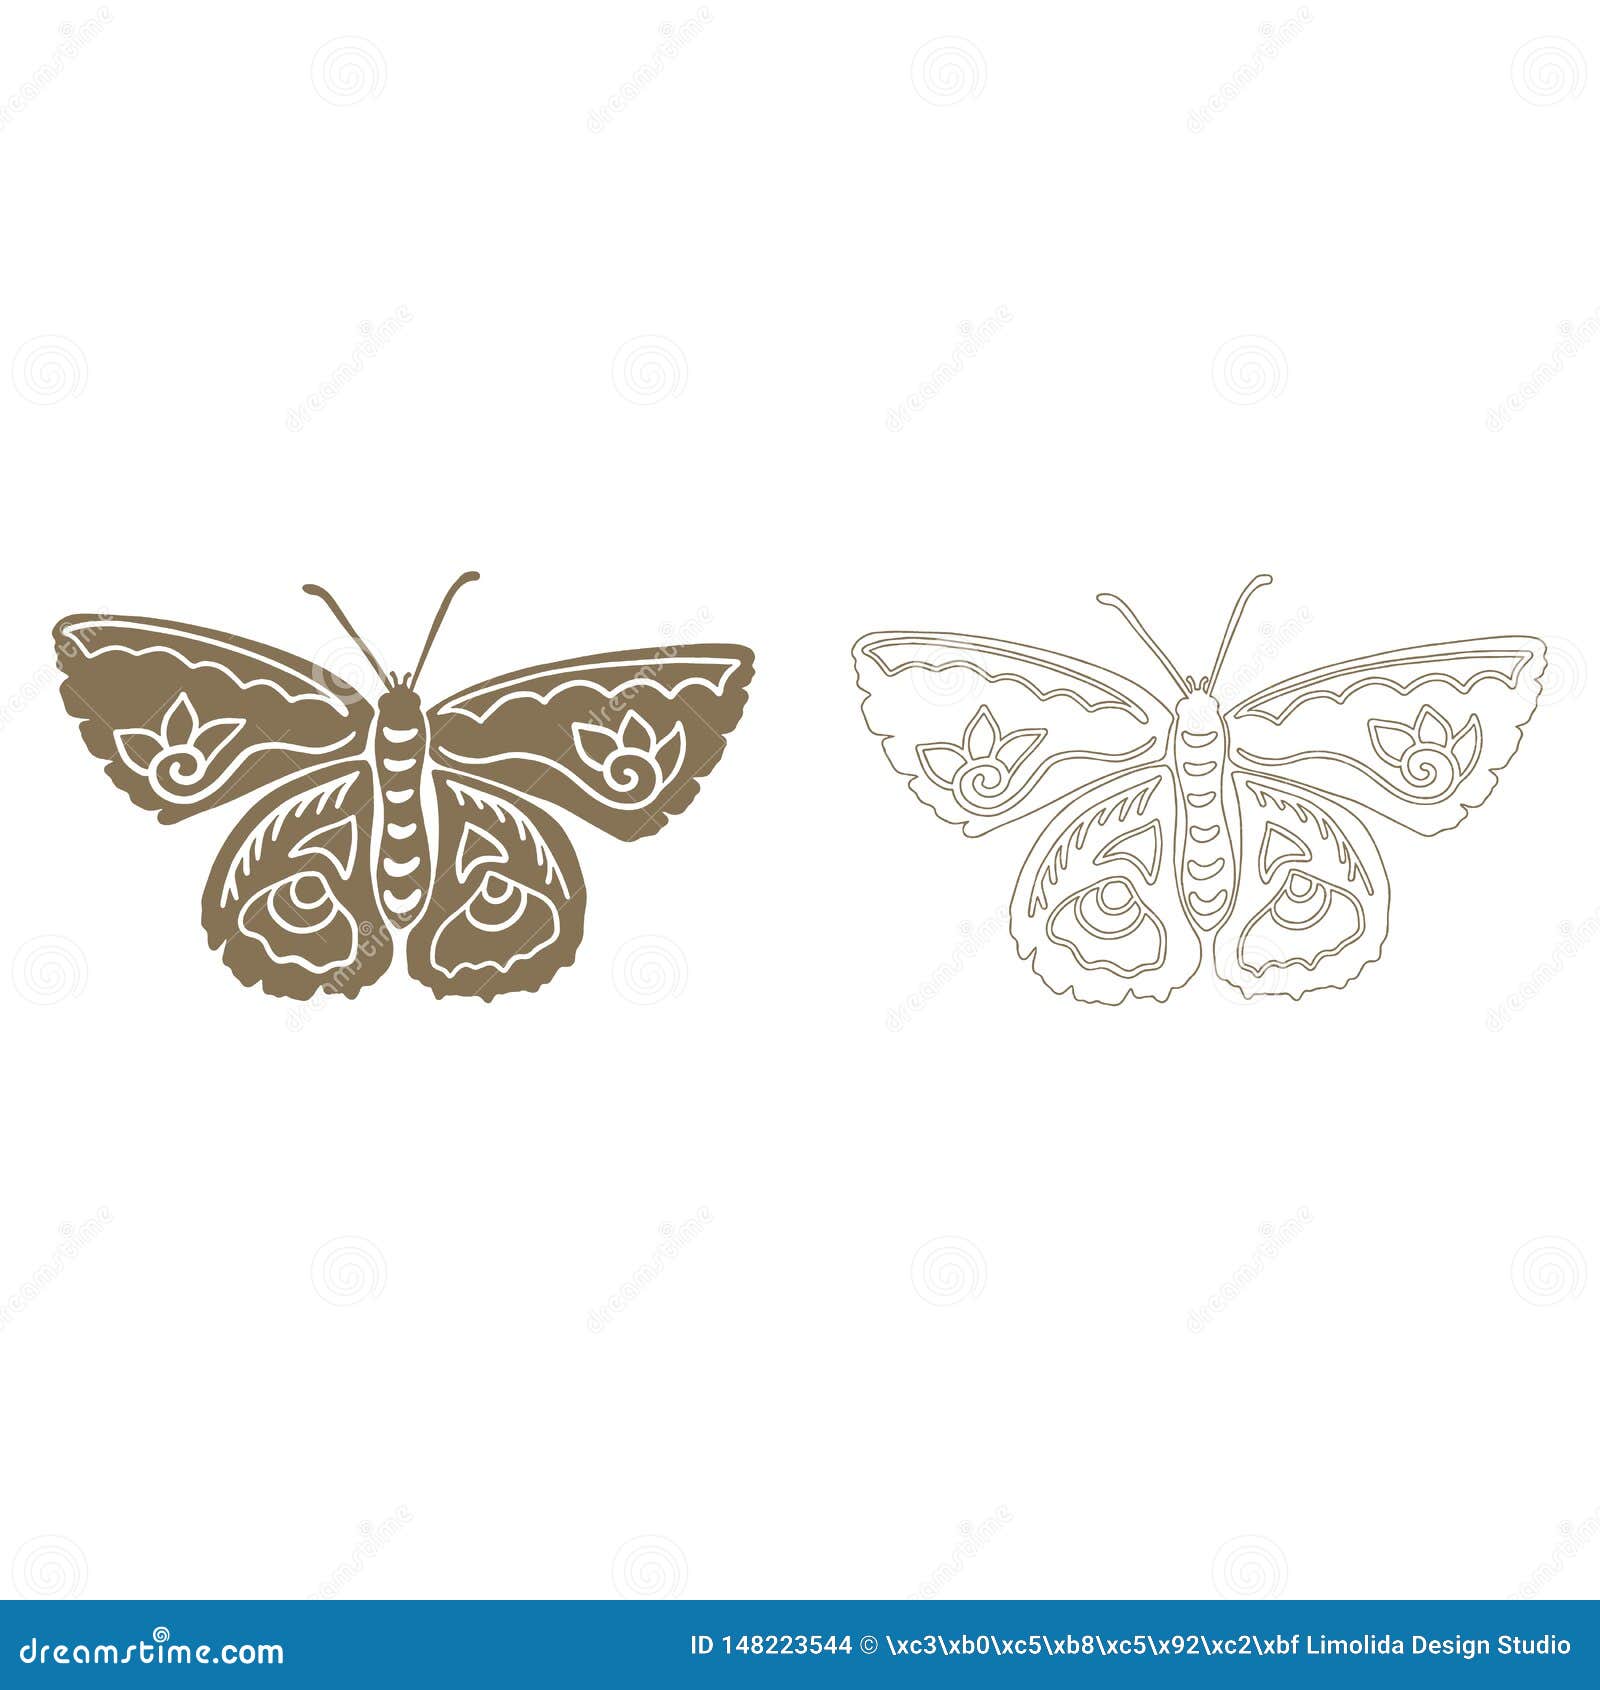 cute moth silhouette cartoon   motif set. hand drawn nocturnal insect s clipart for creepy crawly blog